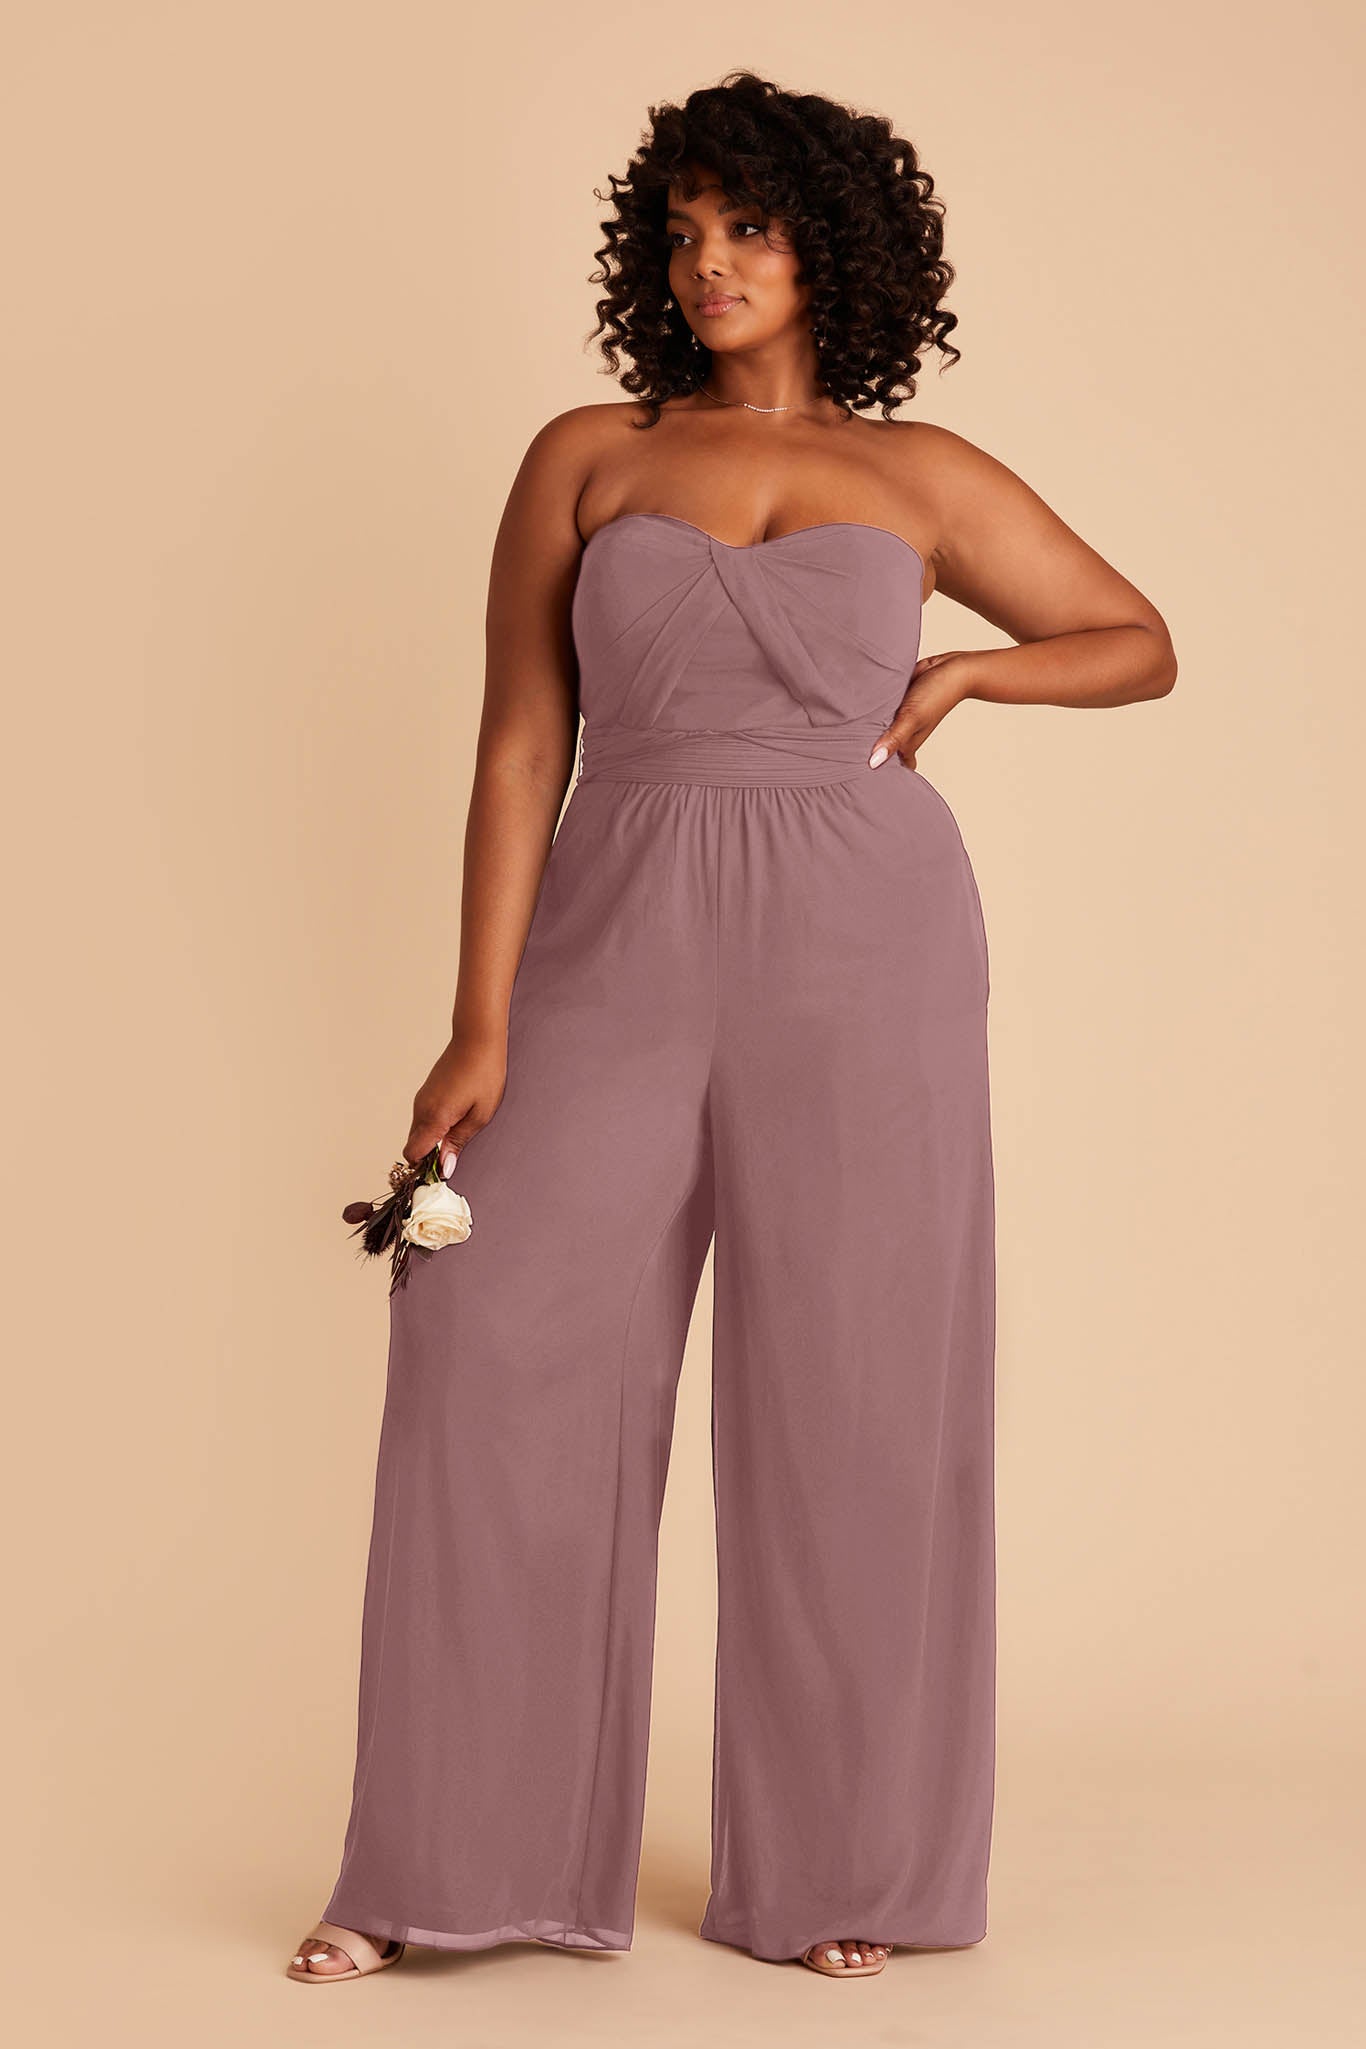 Purple plus size wedding jumpsuit with sweetheart bodice with convertible neckline